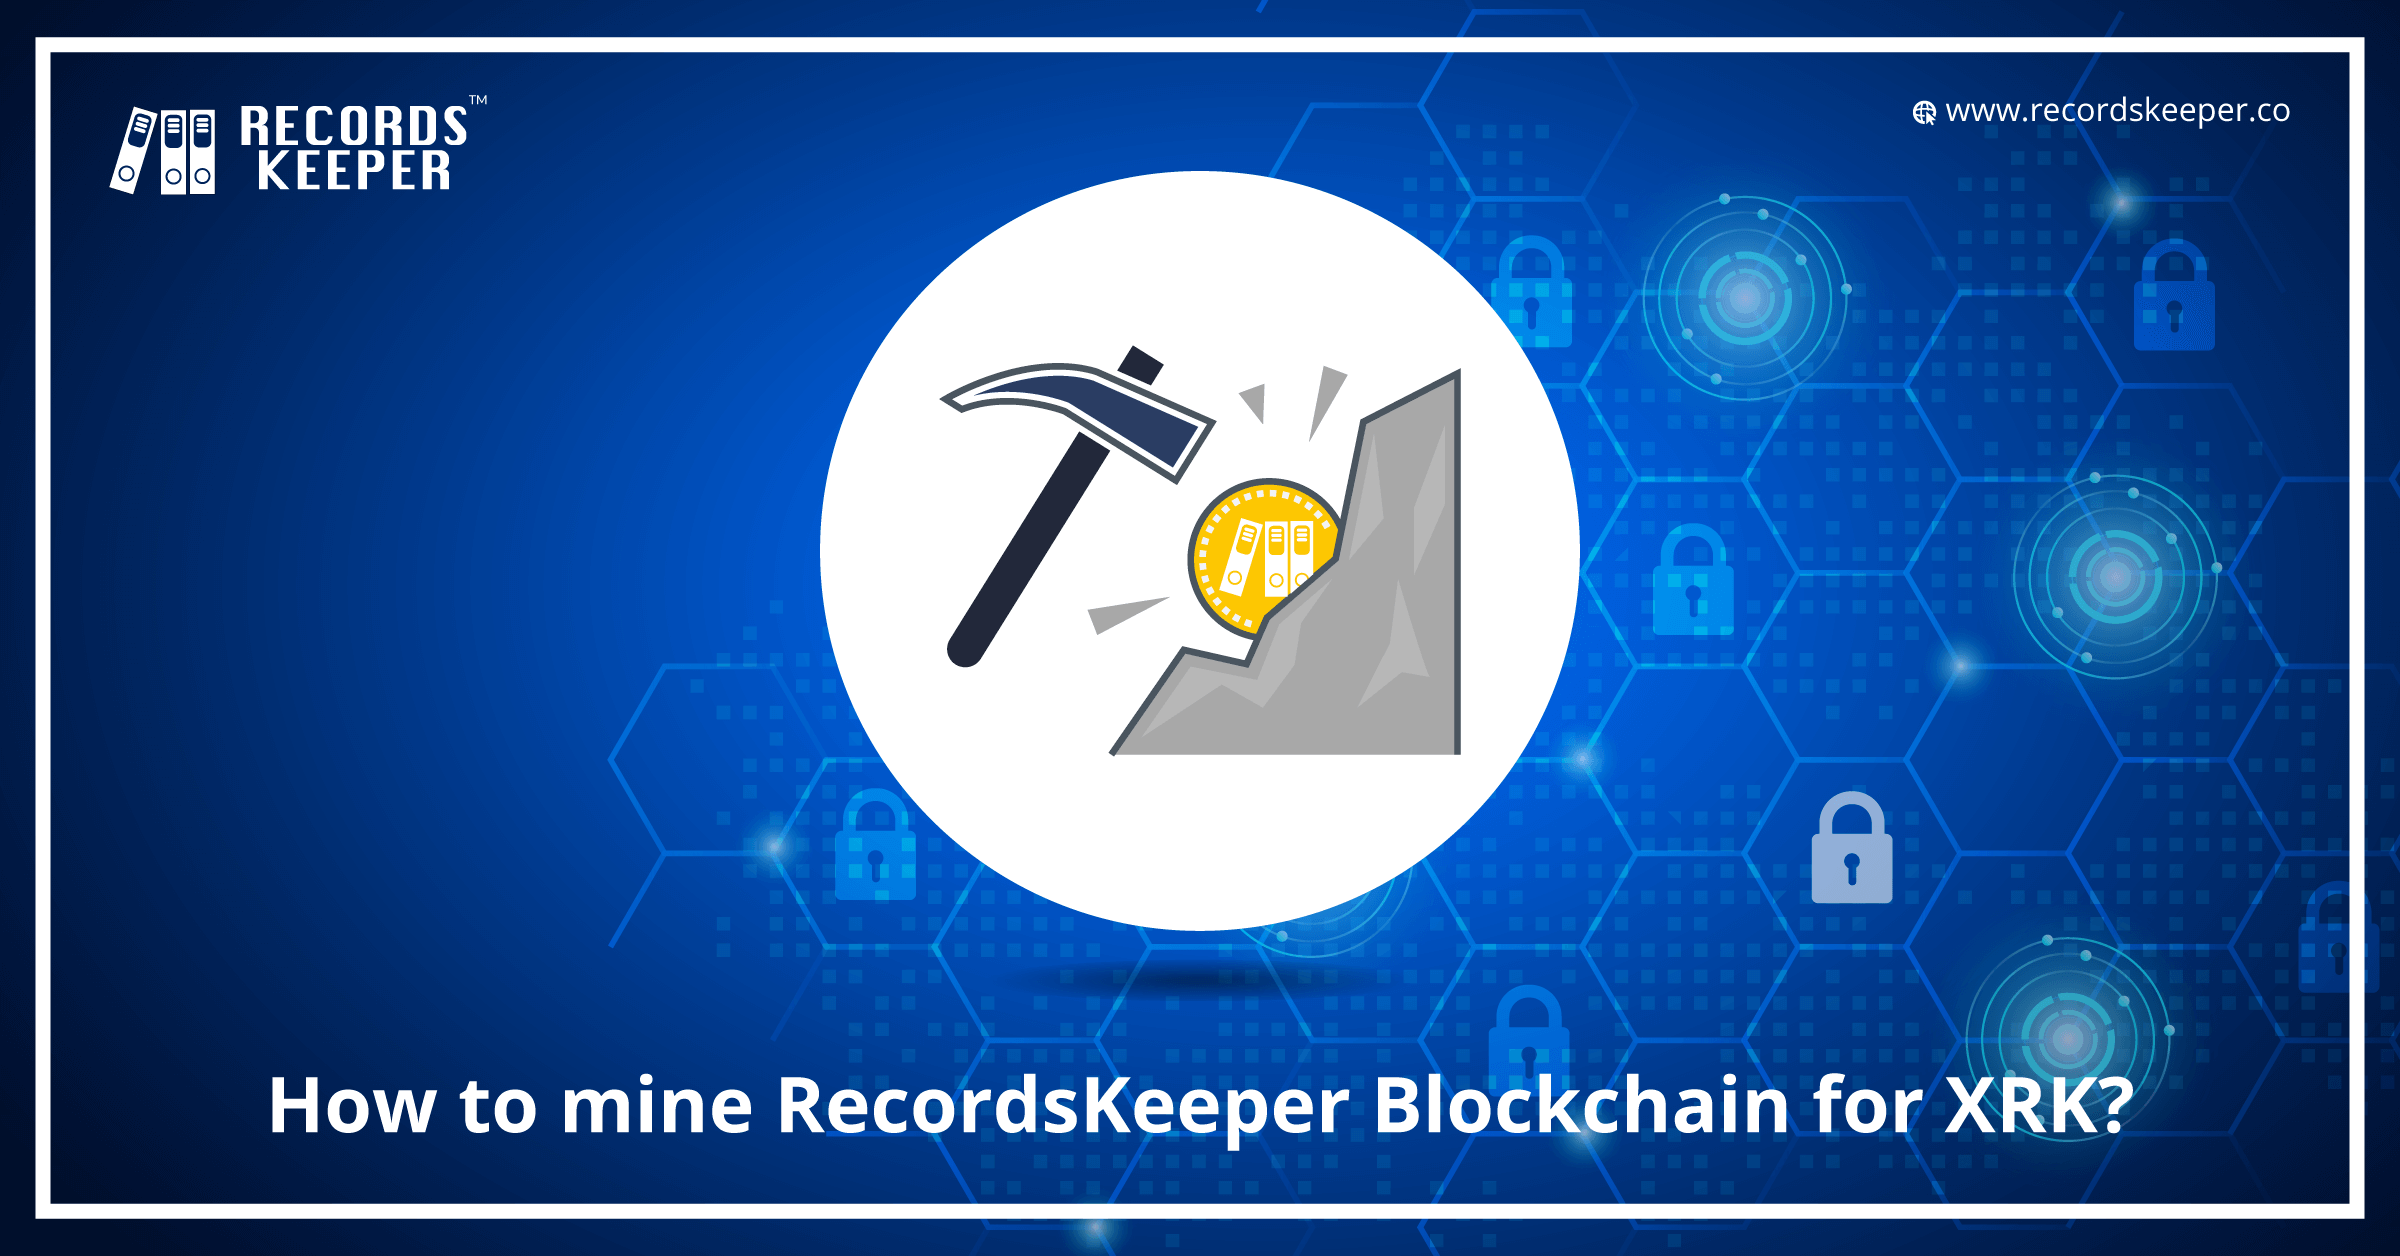 How to mine XRK in RecordsKeeper Blockchain?